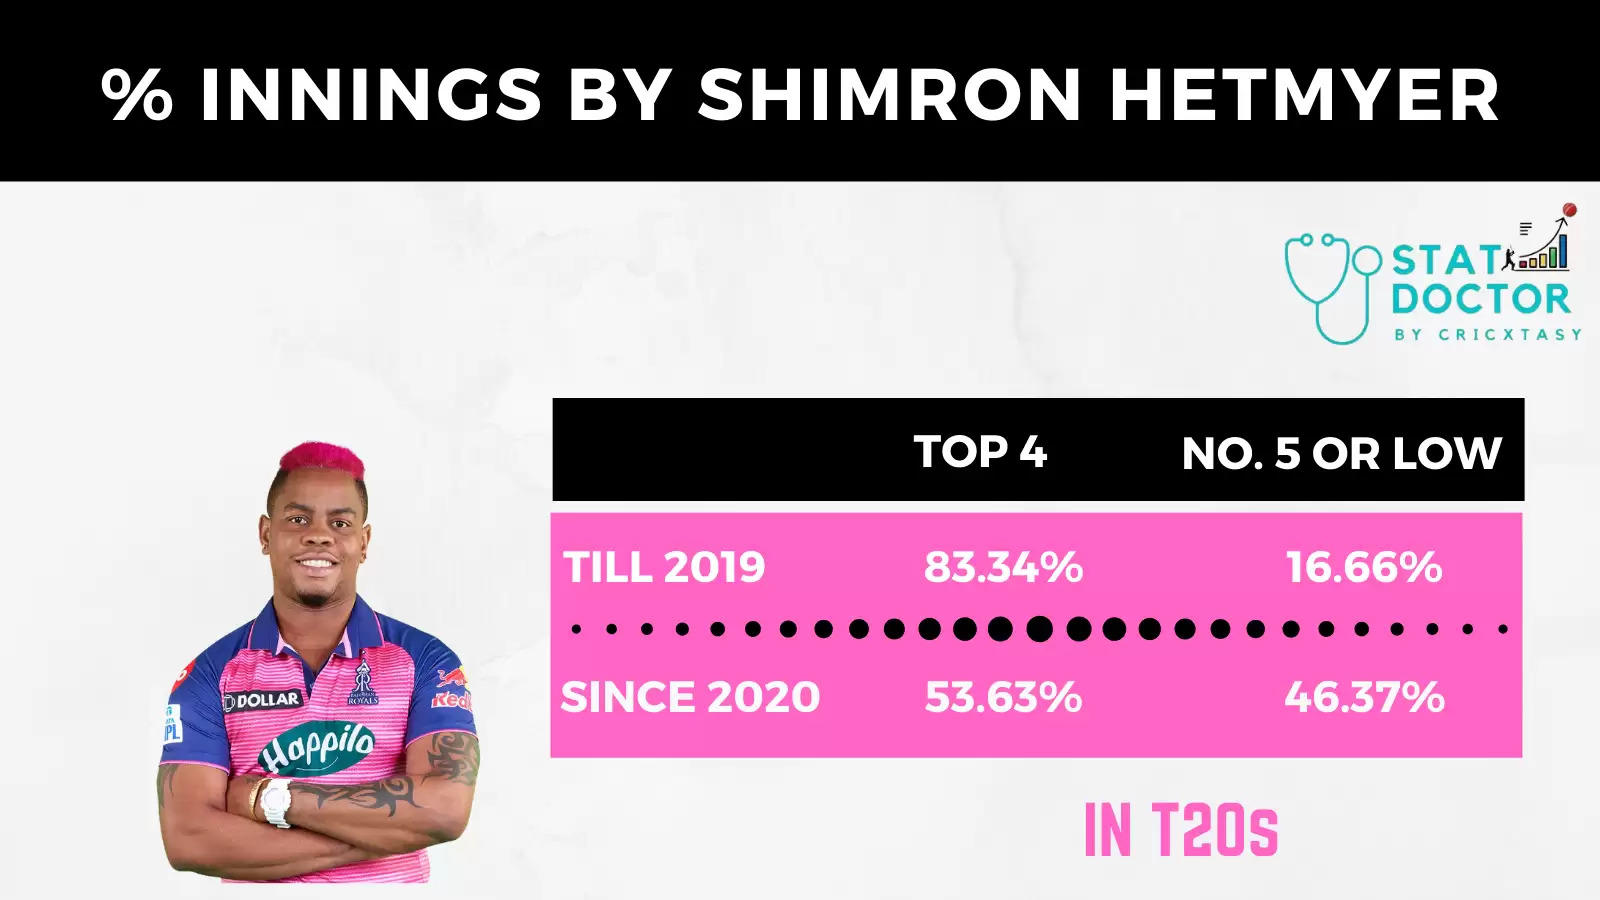 Innings batted by Shimron Hetmyer based on batting position